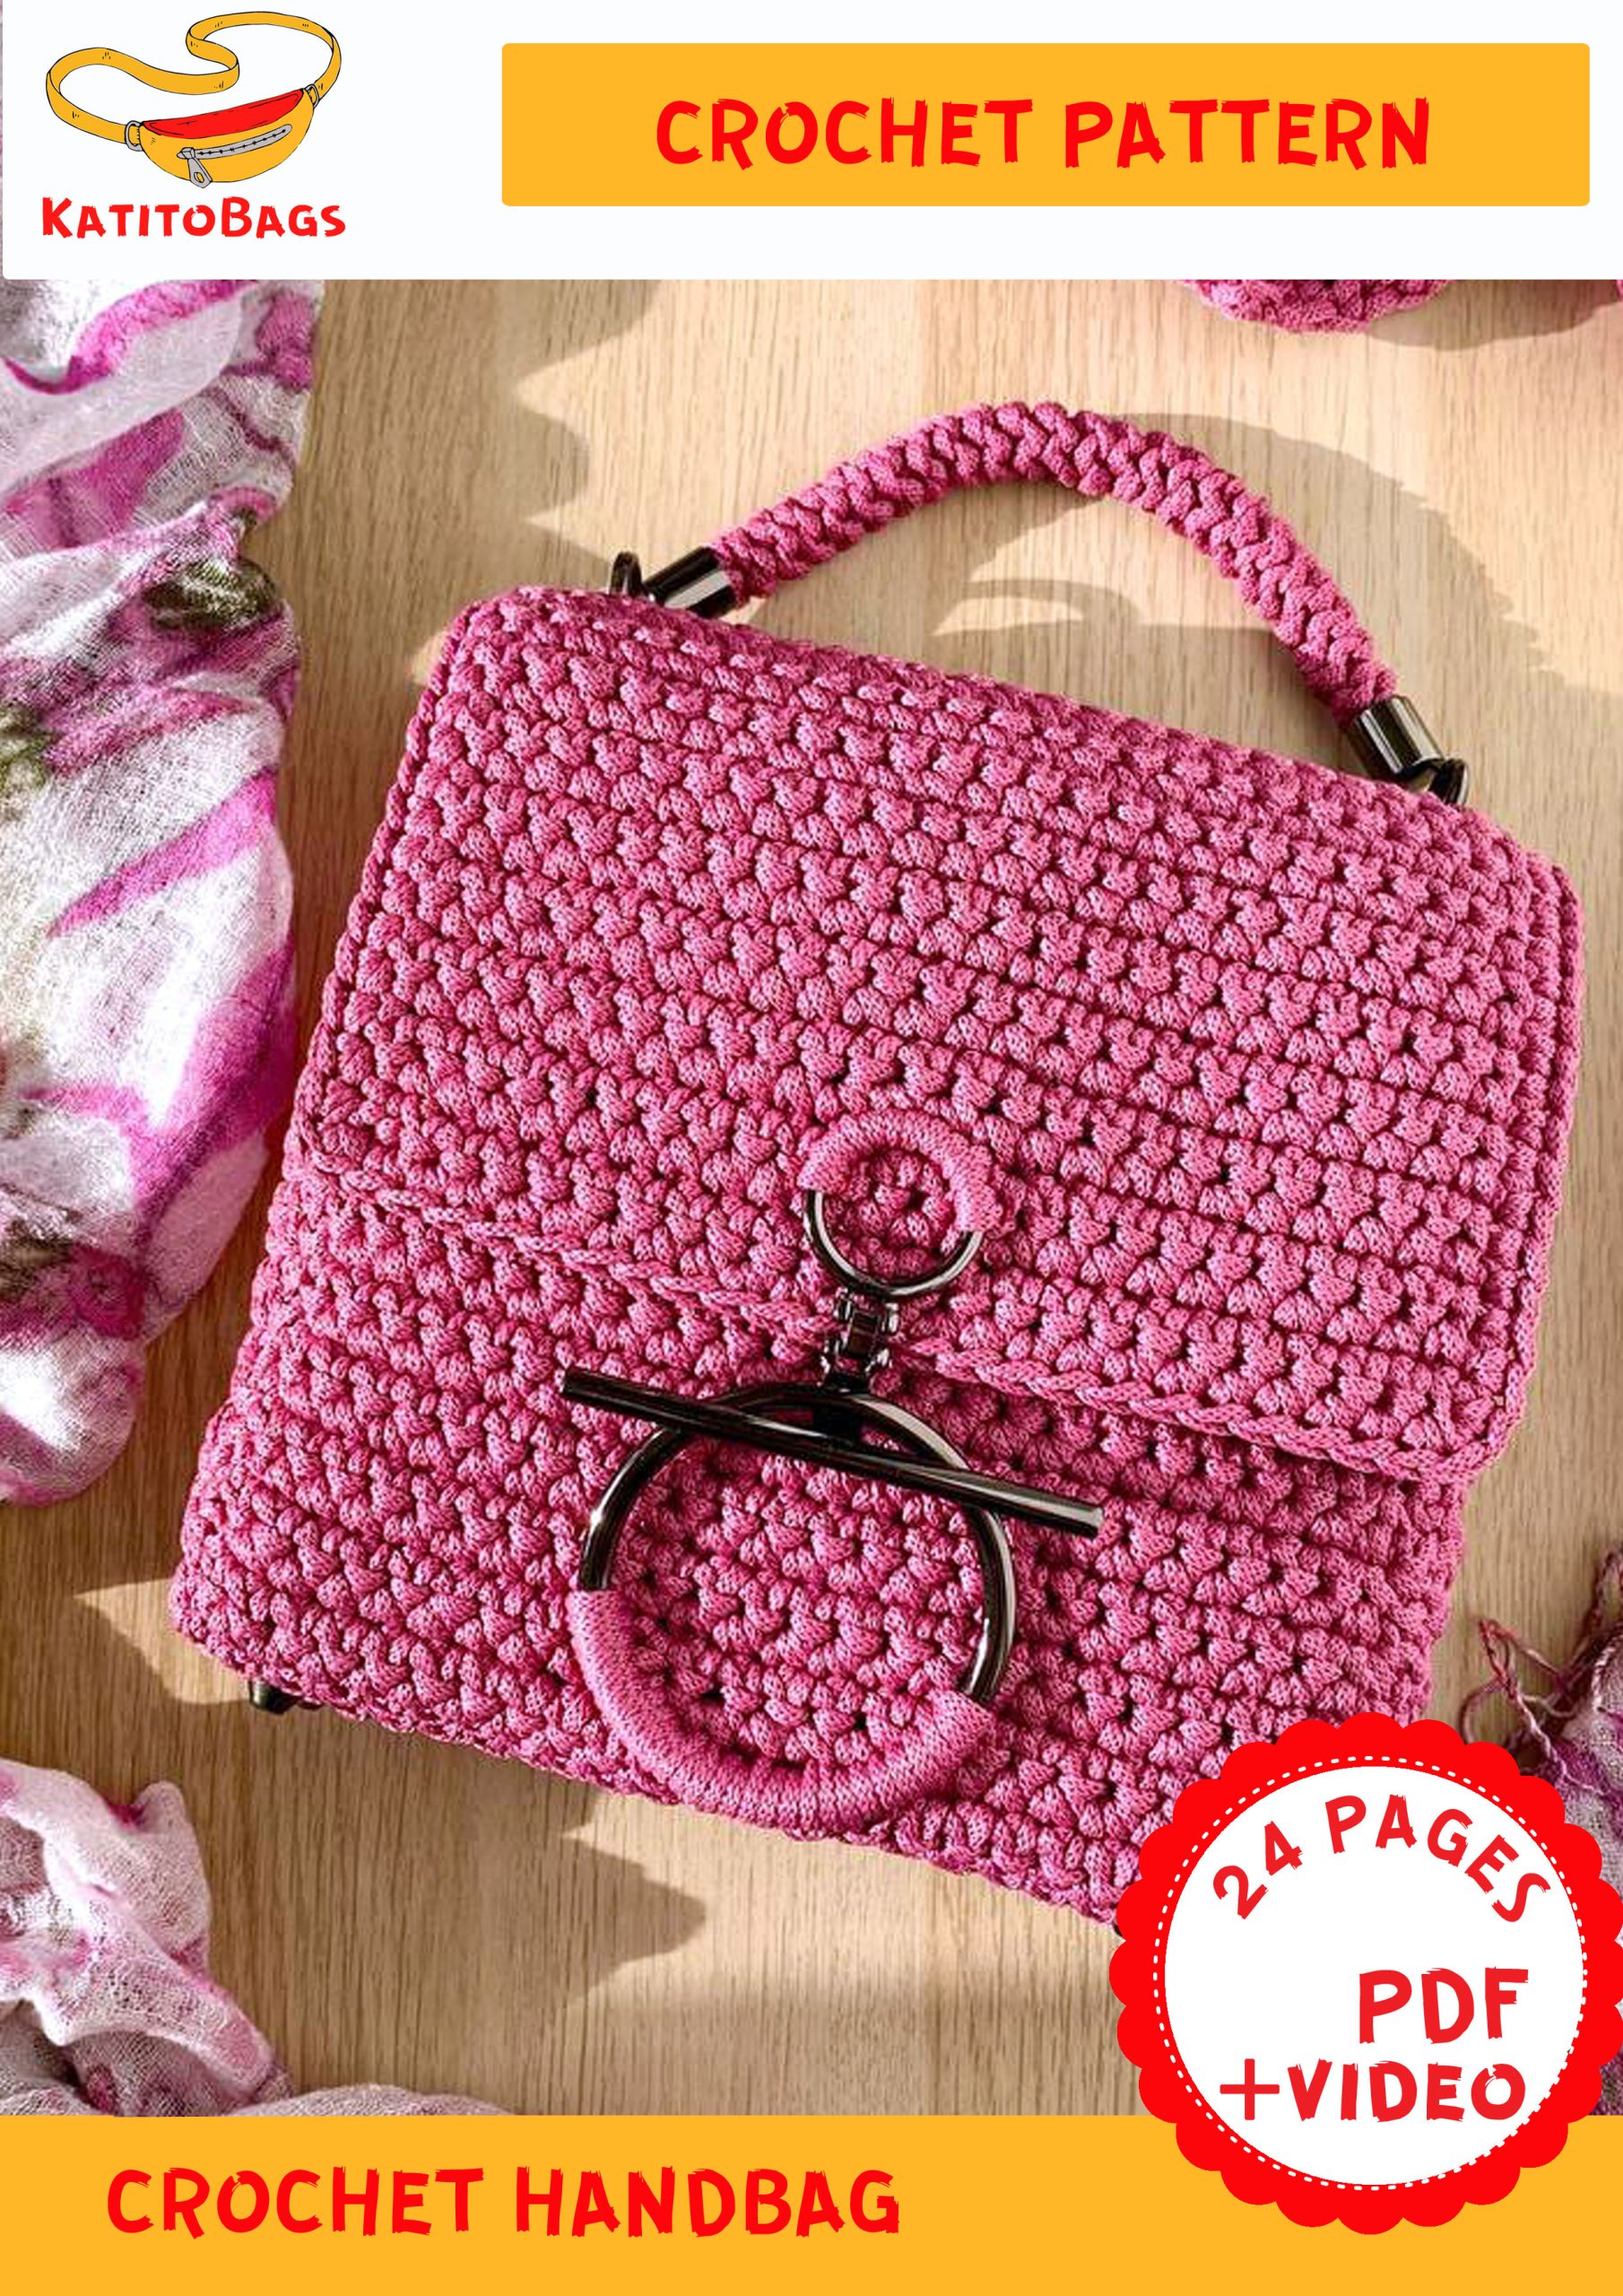 1) LLBC • Louis Vuitton inspired Crochet bag Tapestry Crochet, Changing  Color • Easy Tutorial Part1 -… in 2023